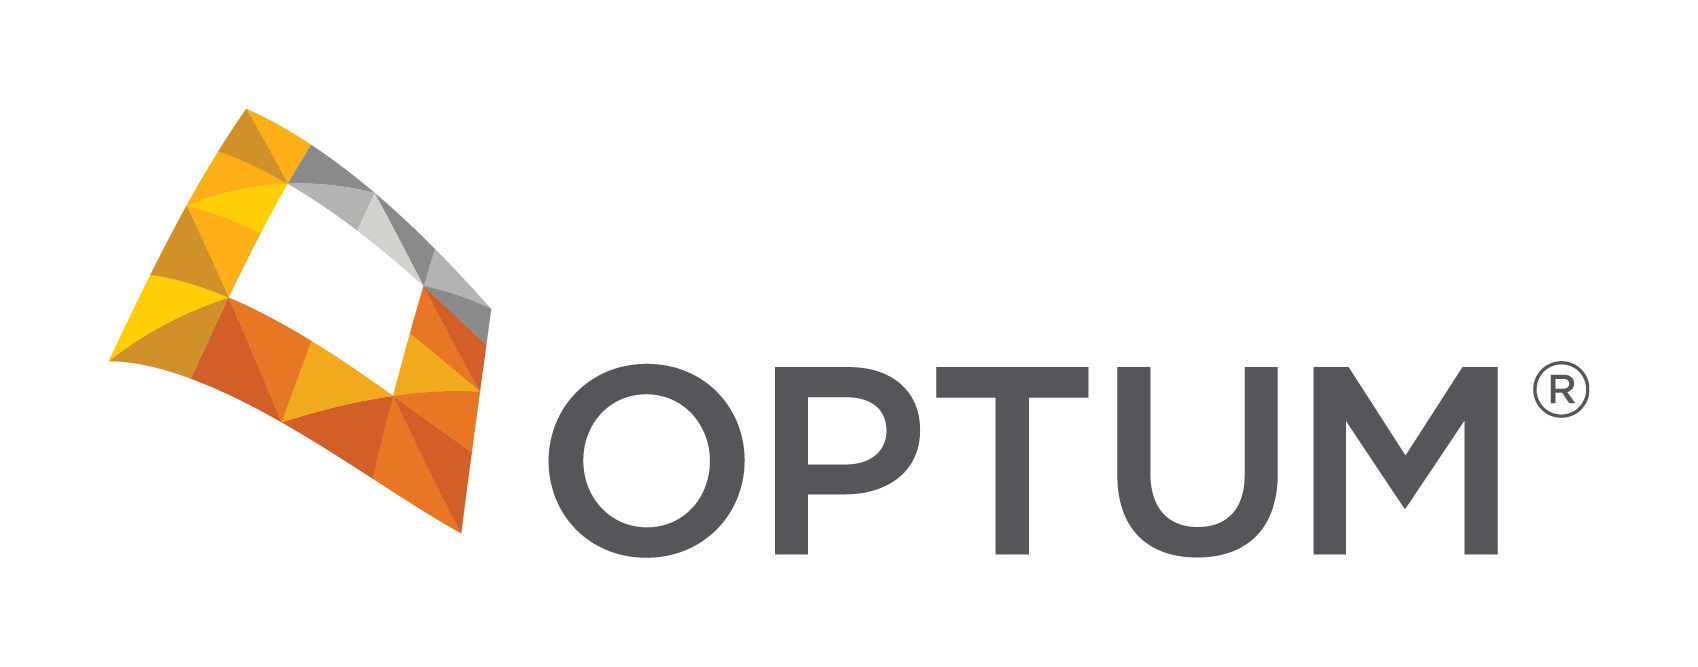 ssm health and optum launch innovative collaboration to make quality care more accessible and affordable | business wire